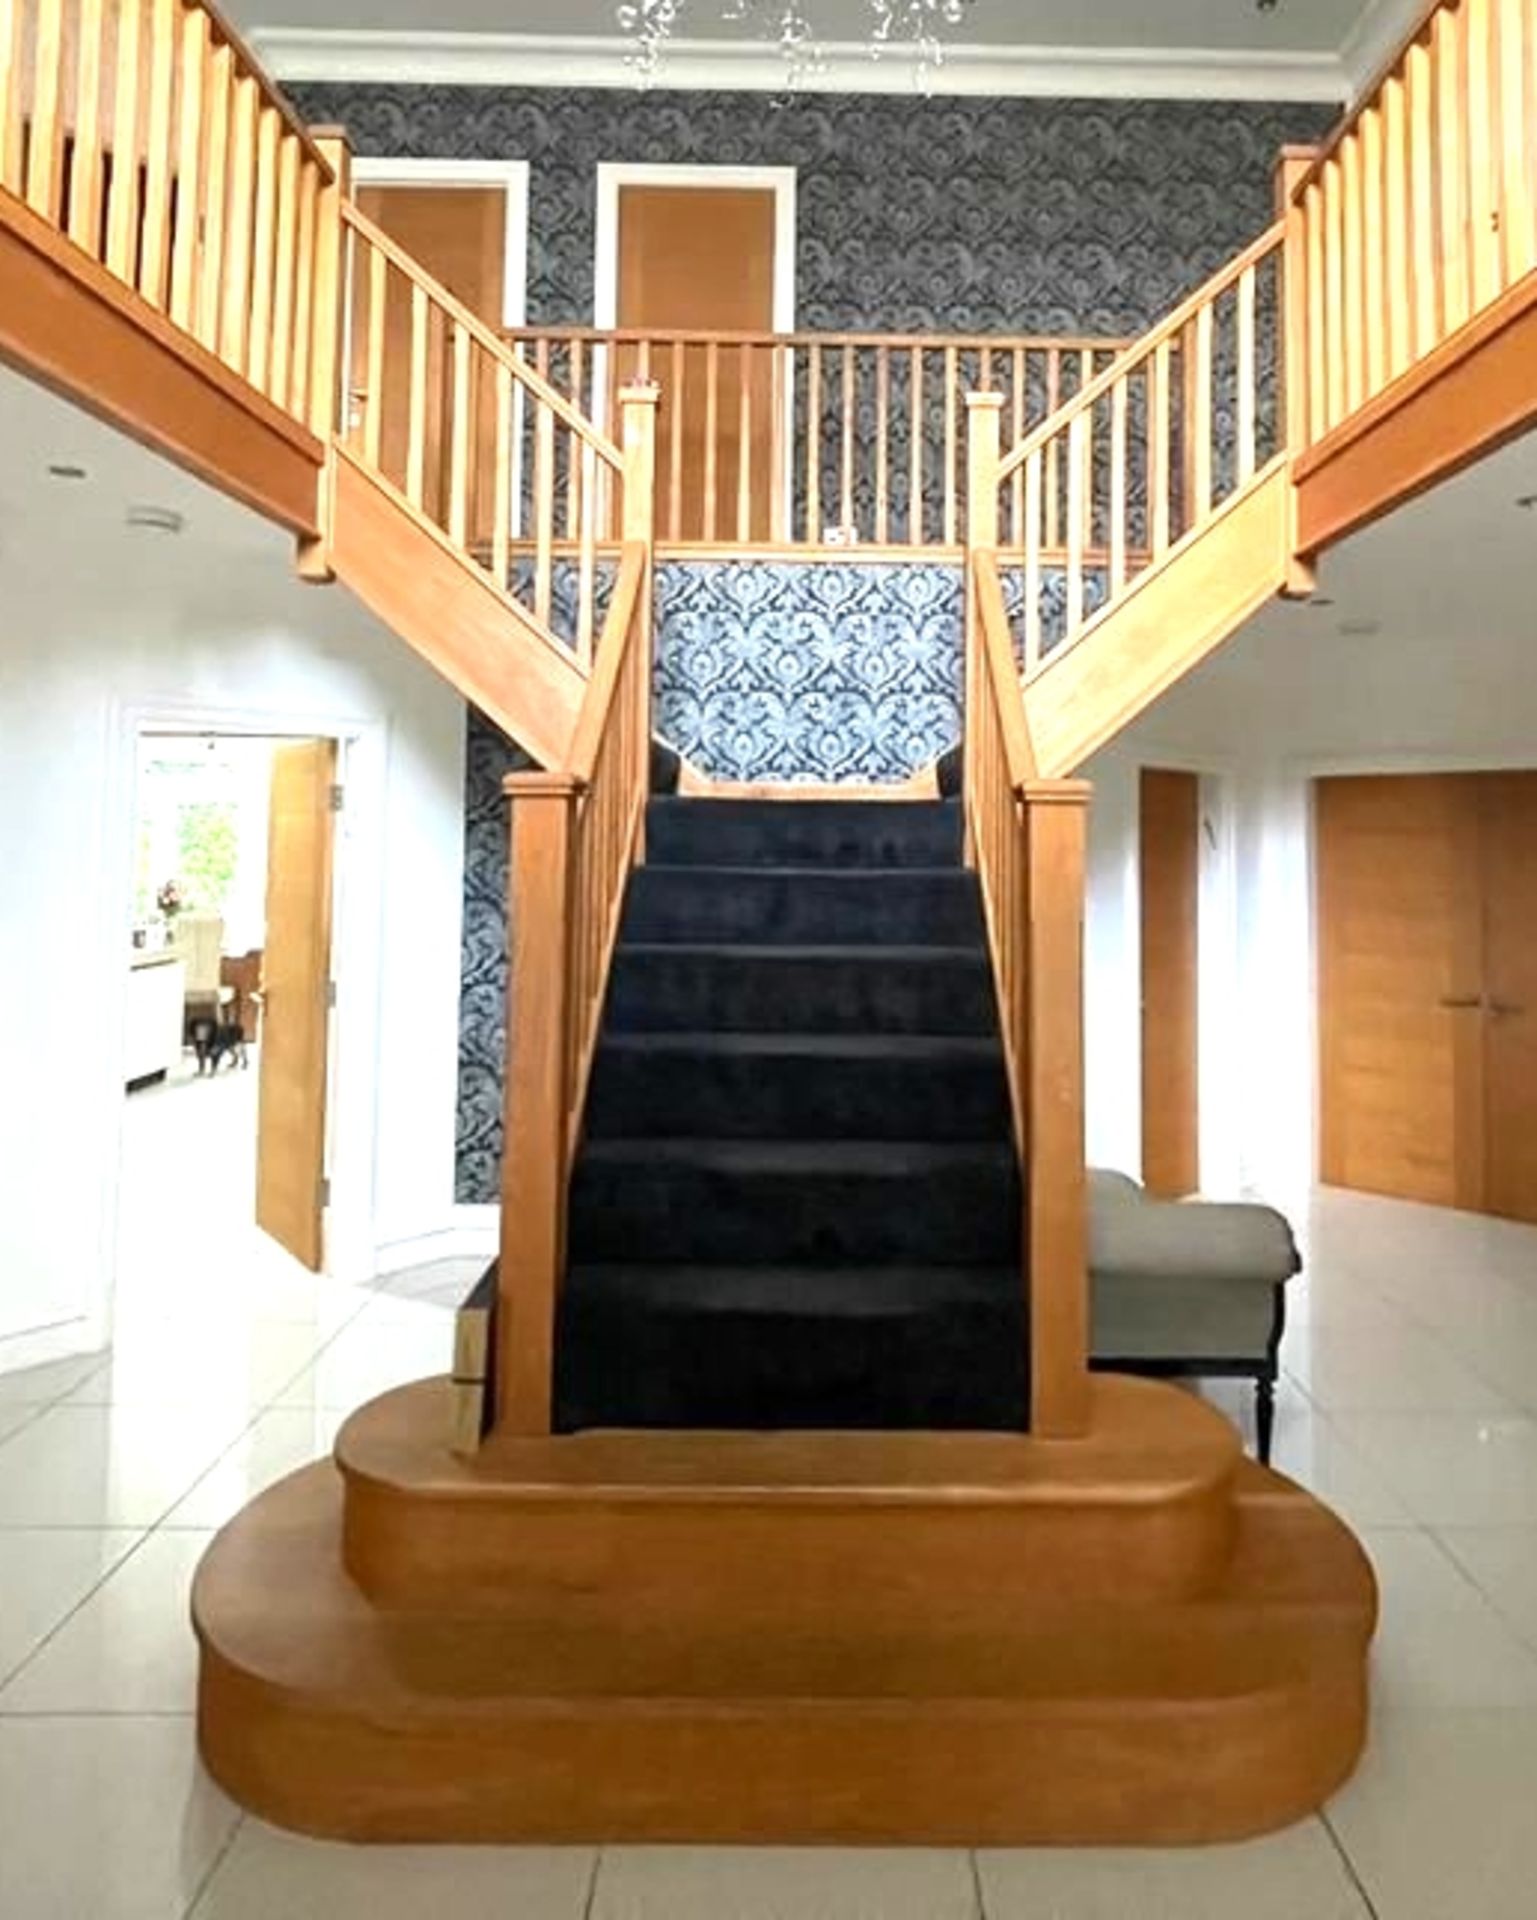 Solid Oak Staircase and Landing Accessories Including Spindles, Posts and Handrails - Approx 140 - Image 3 of 5